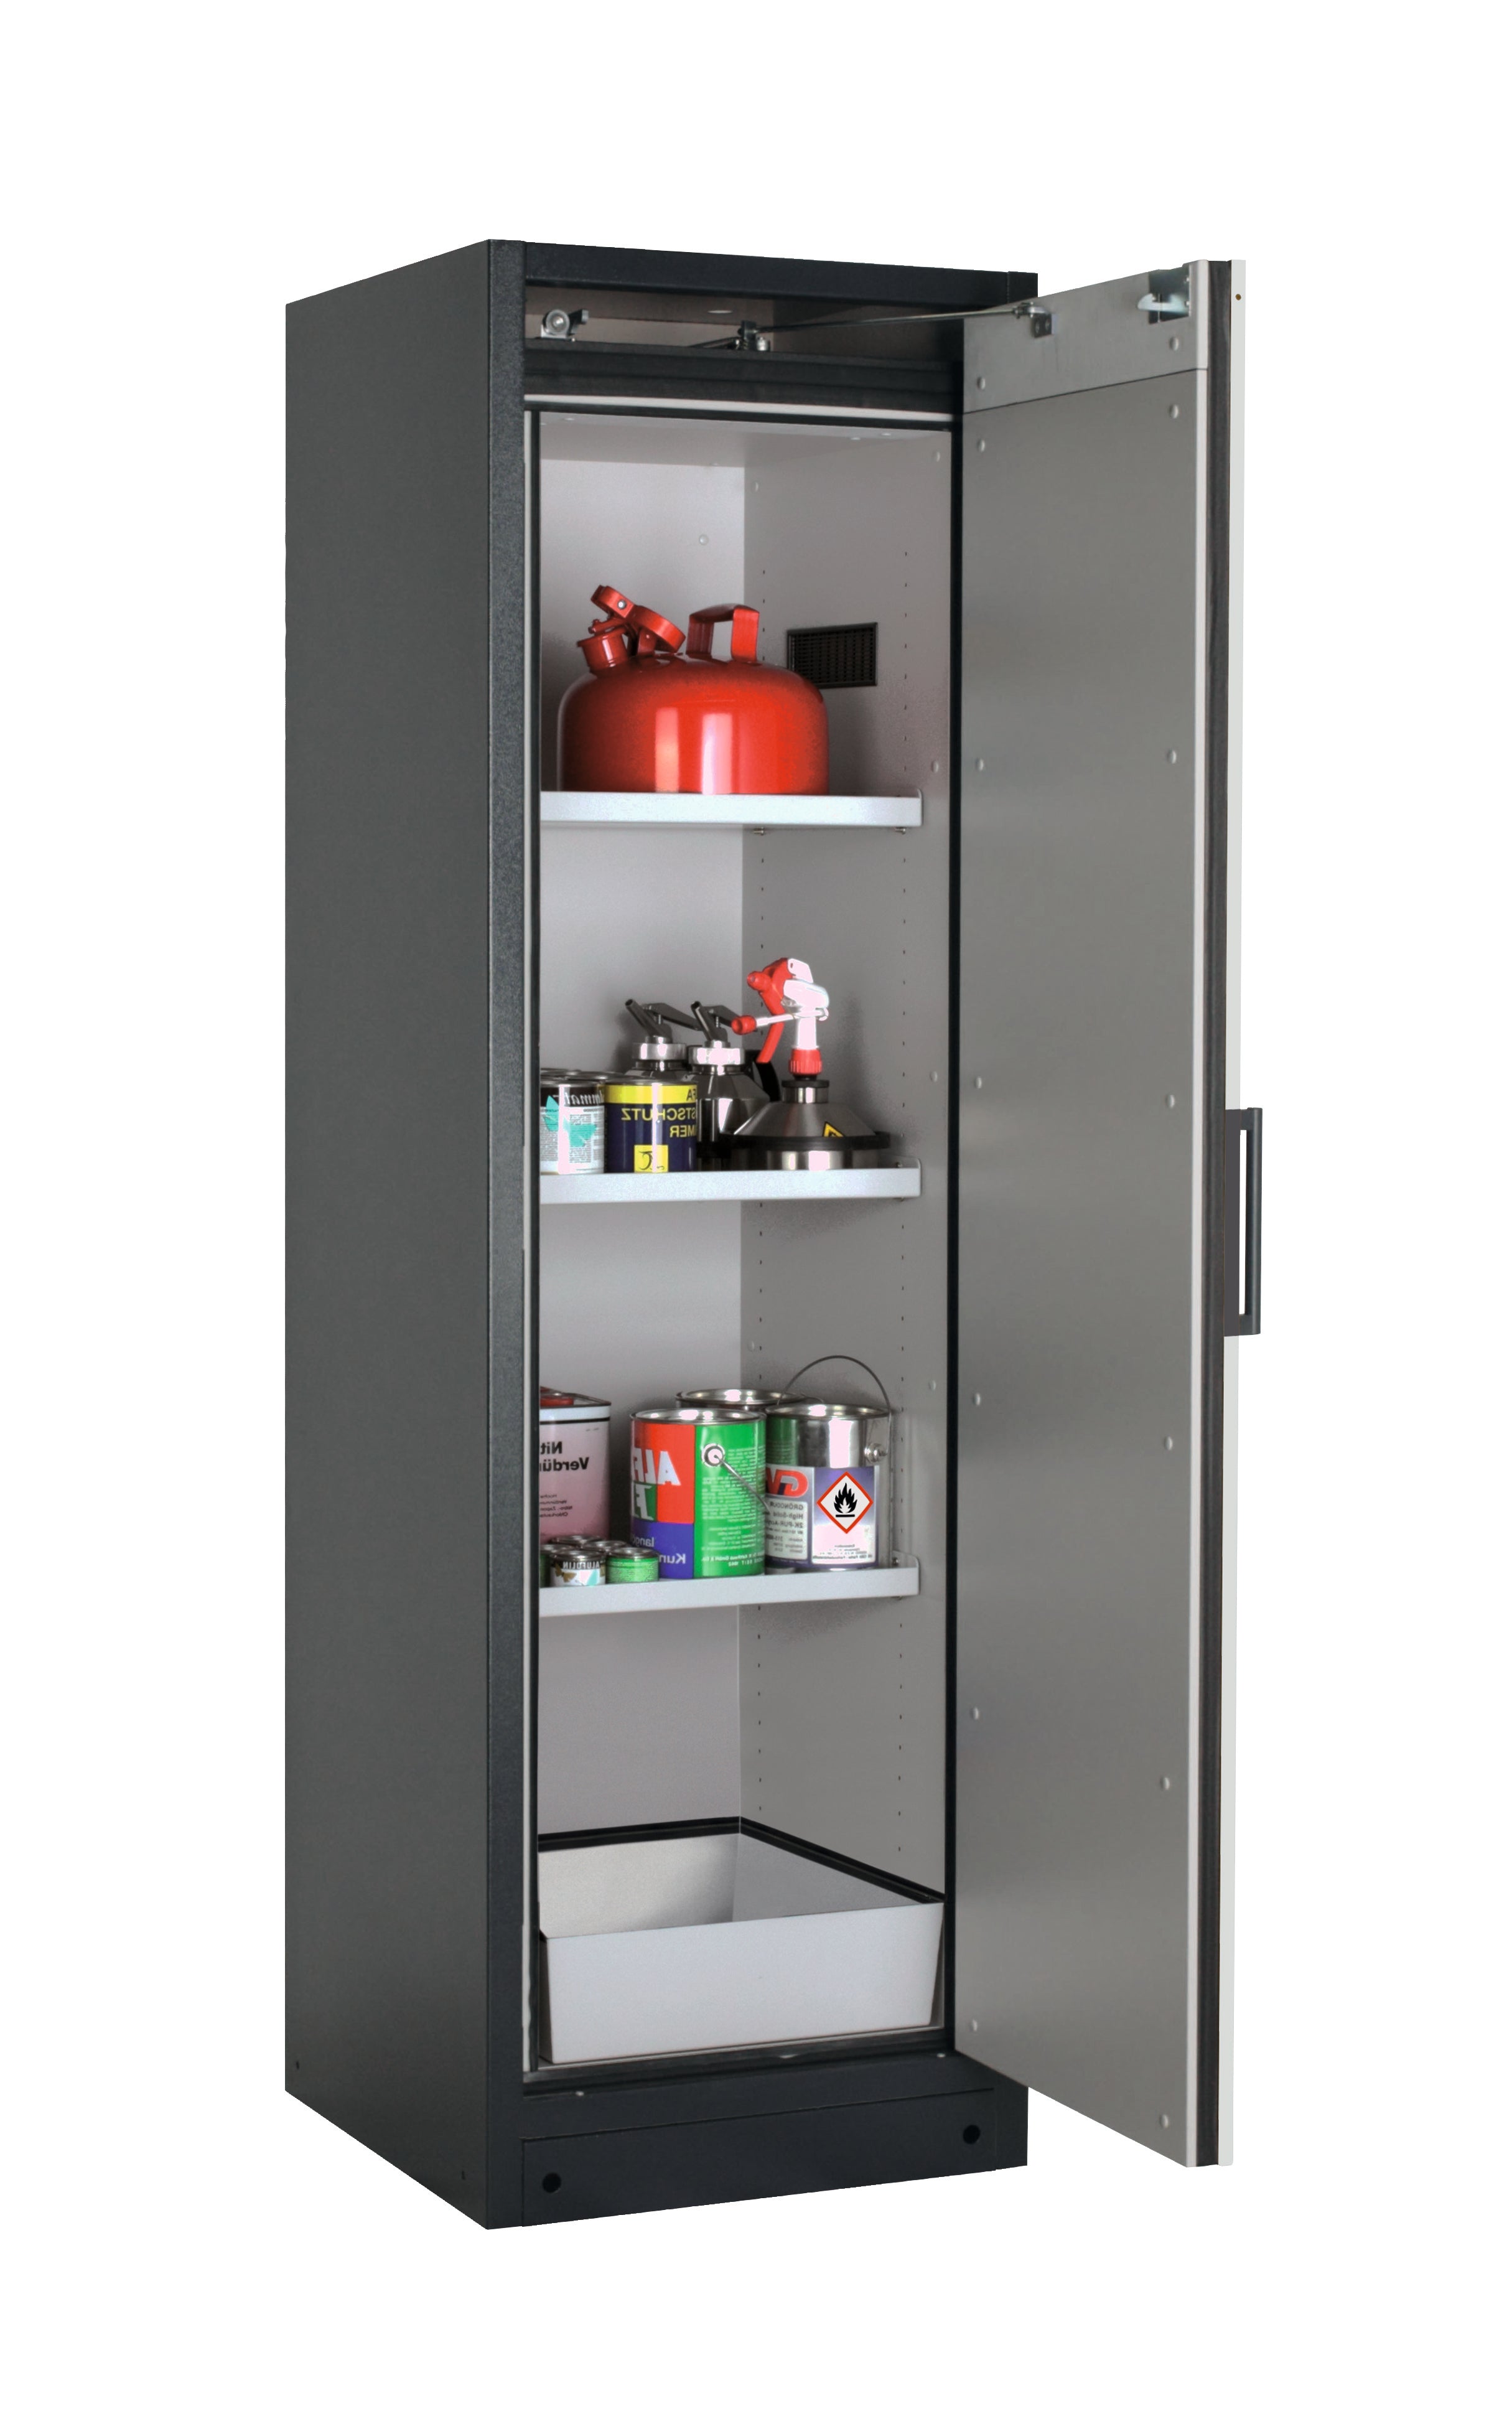 Type 90 safety storage cabinet Q-CLASSIC-90 model Q90.195.060.R in light grey RAL 7035 with 3x shelf standard (sheet steel),